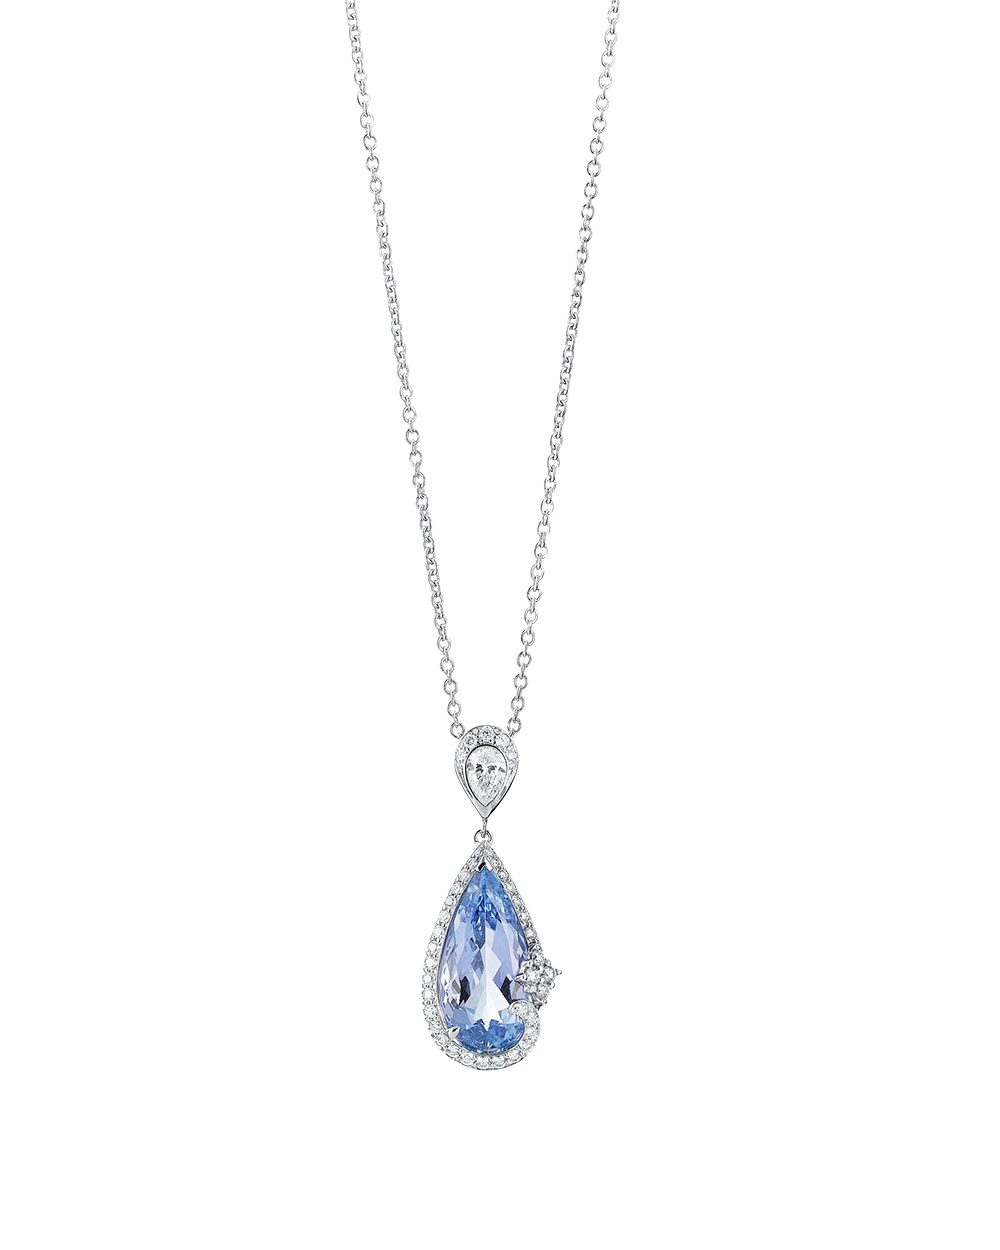 Necklace, $15,995, from Partridge Jewellers.